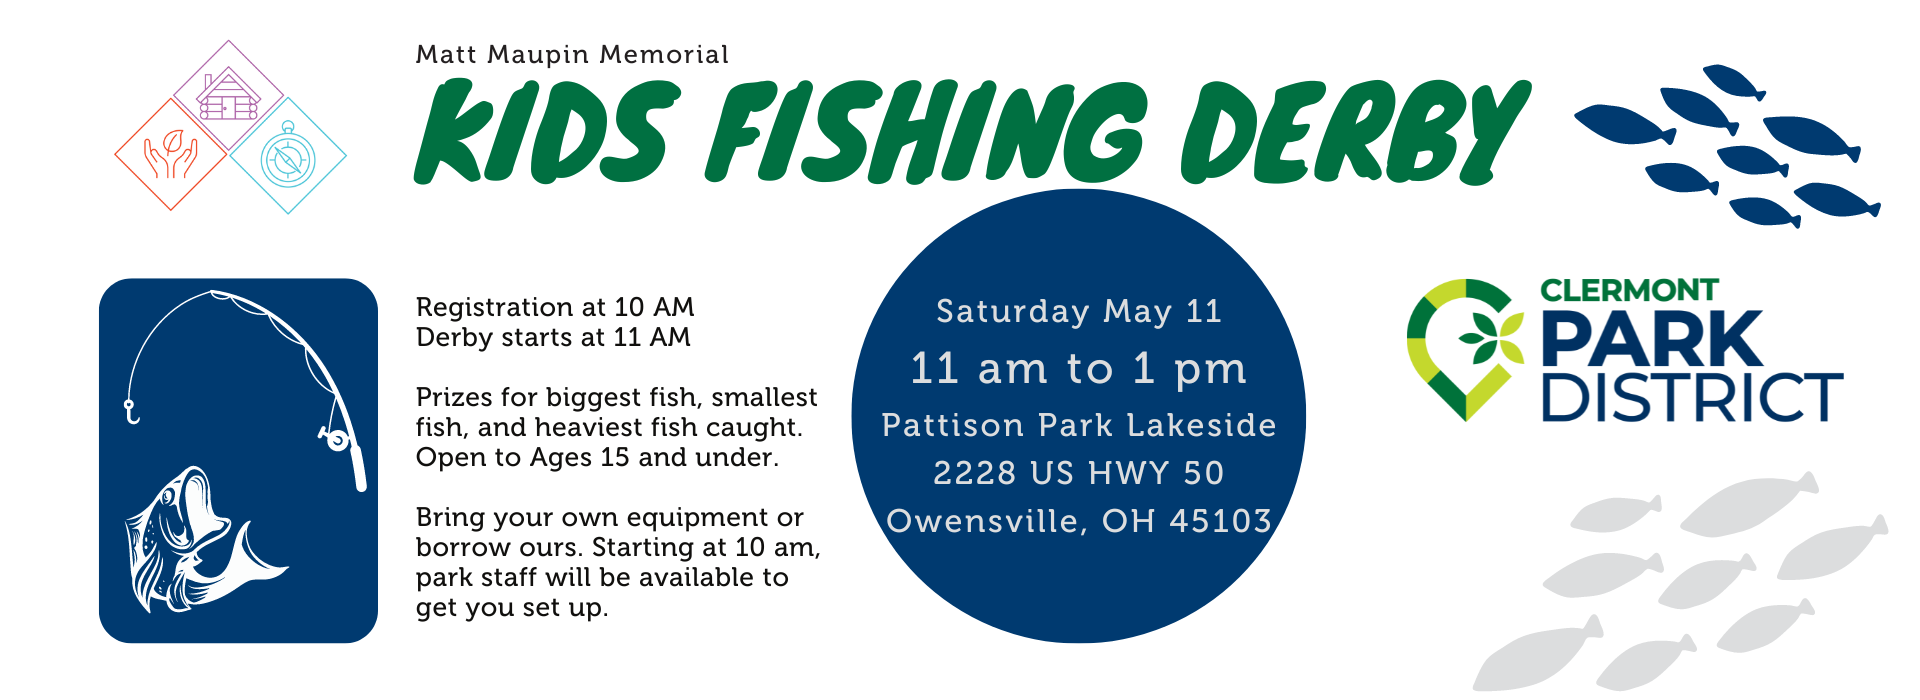 Kids Fishing Derby May 11th  Pattison Park Lakeside  11am-1pm 